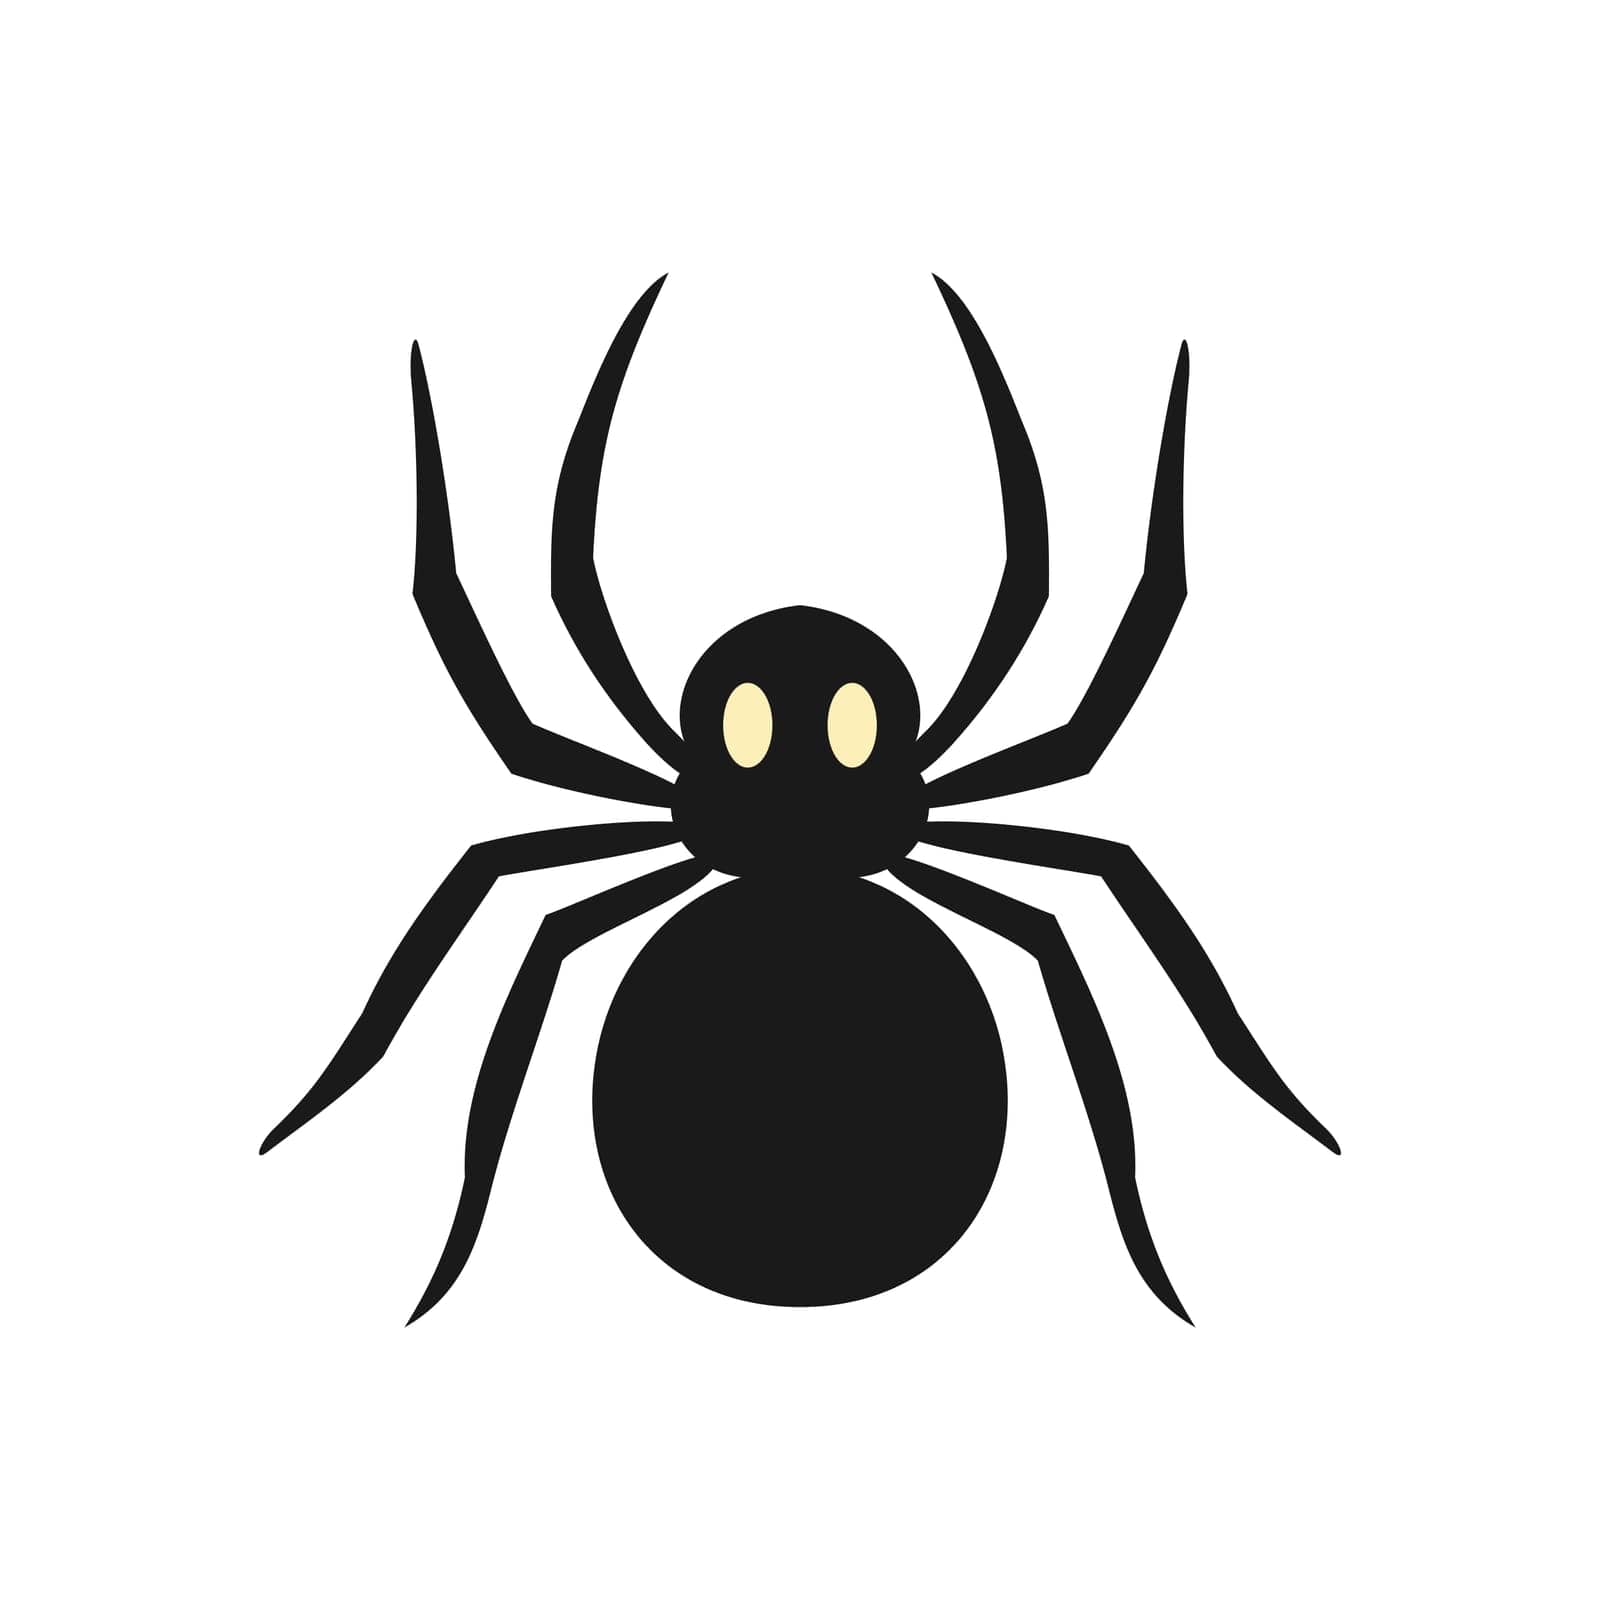 A black spider with yellow eyes on a white background. Spider silhouette. Insect flat design. Vector isolated illustration.